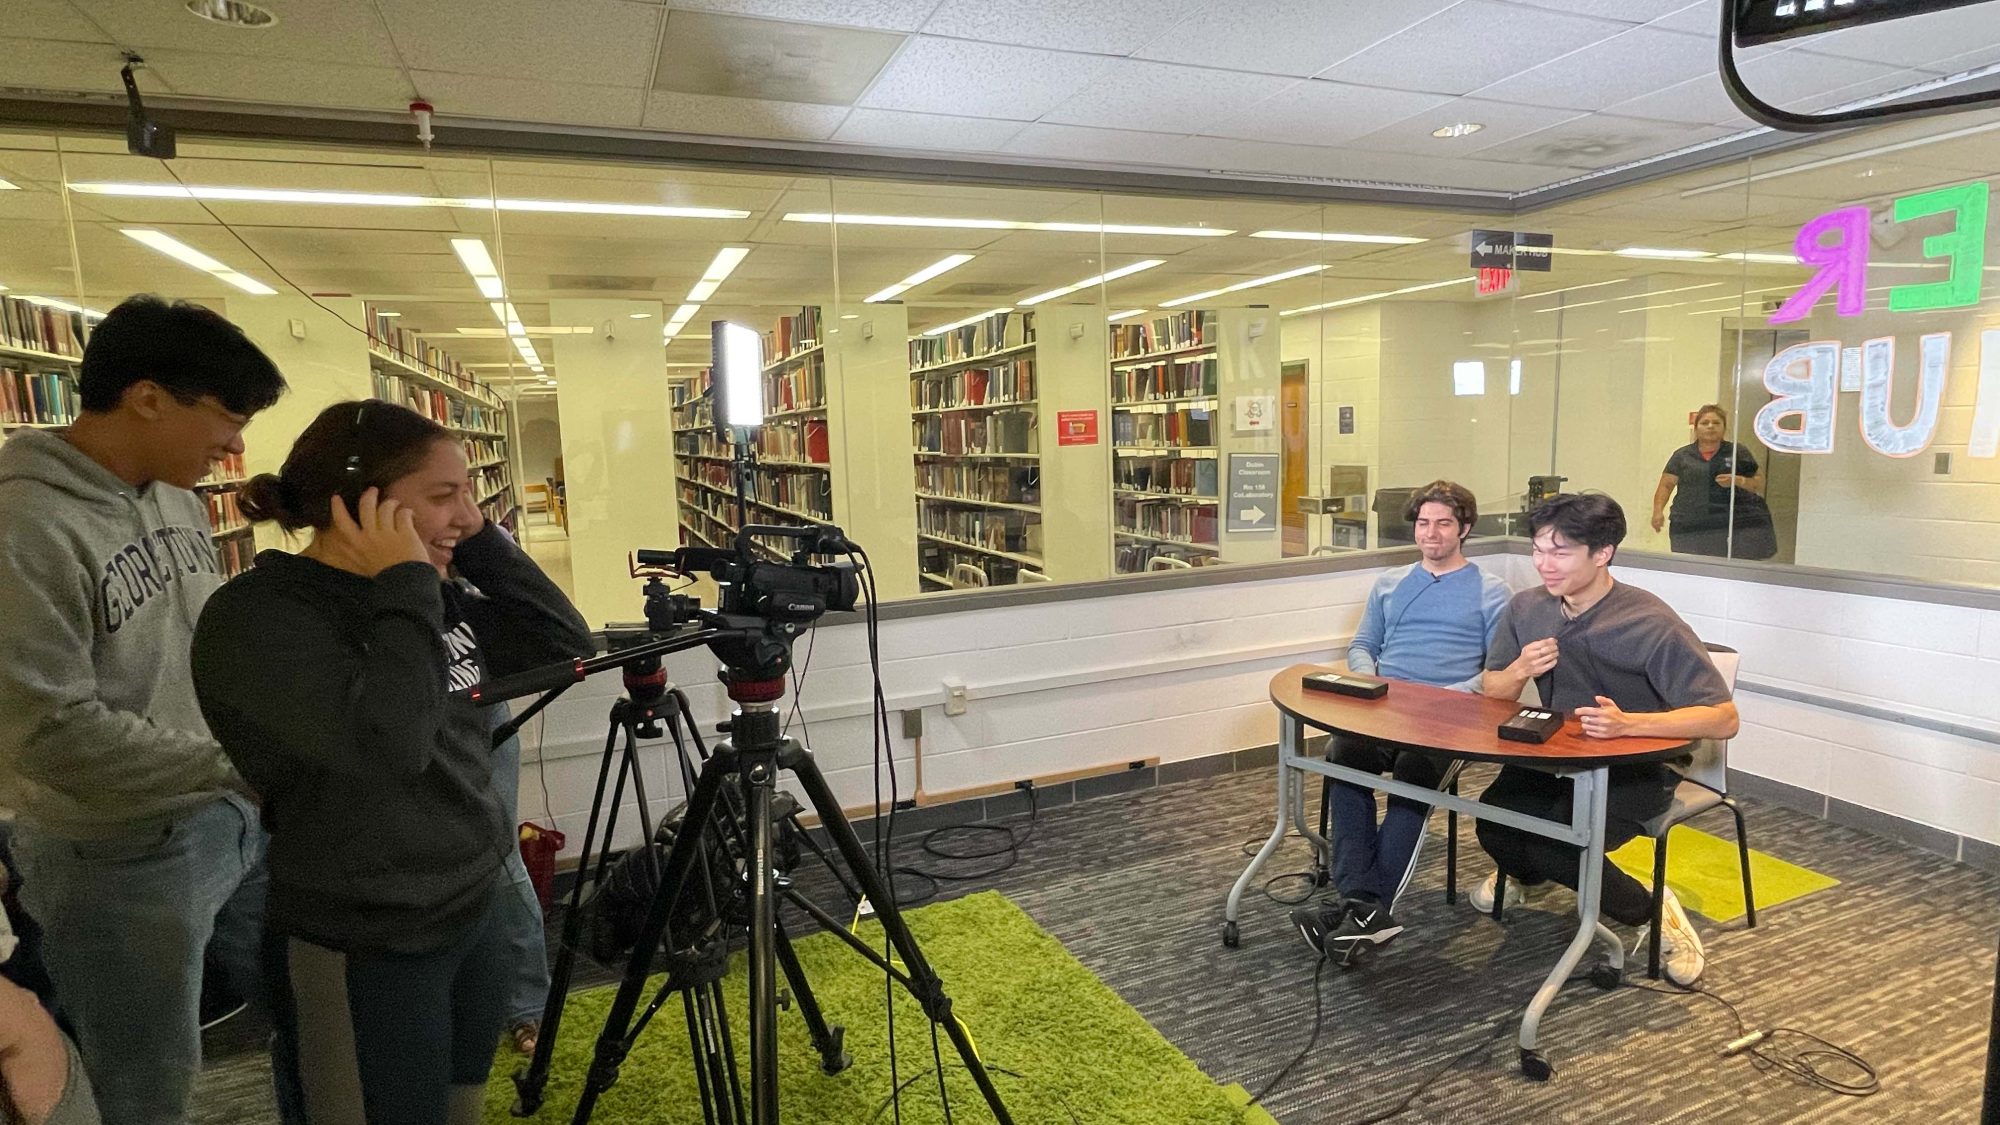 Students practice podcasting, with two students operating cameras and lighting, and another two students being filmed at a desk